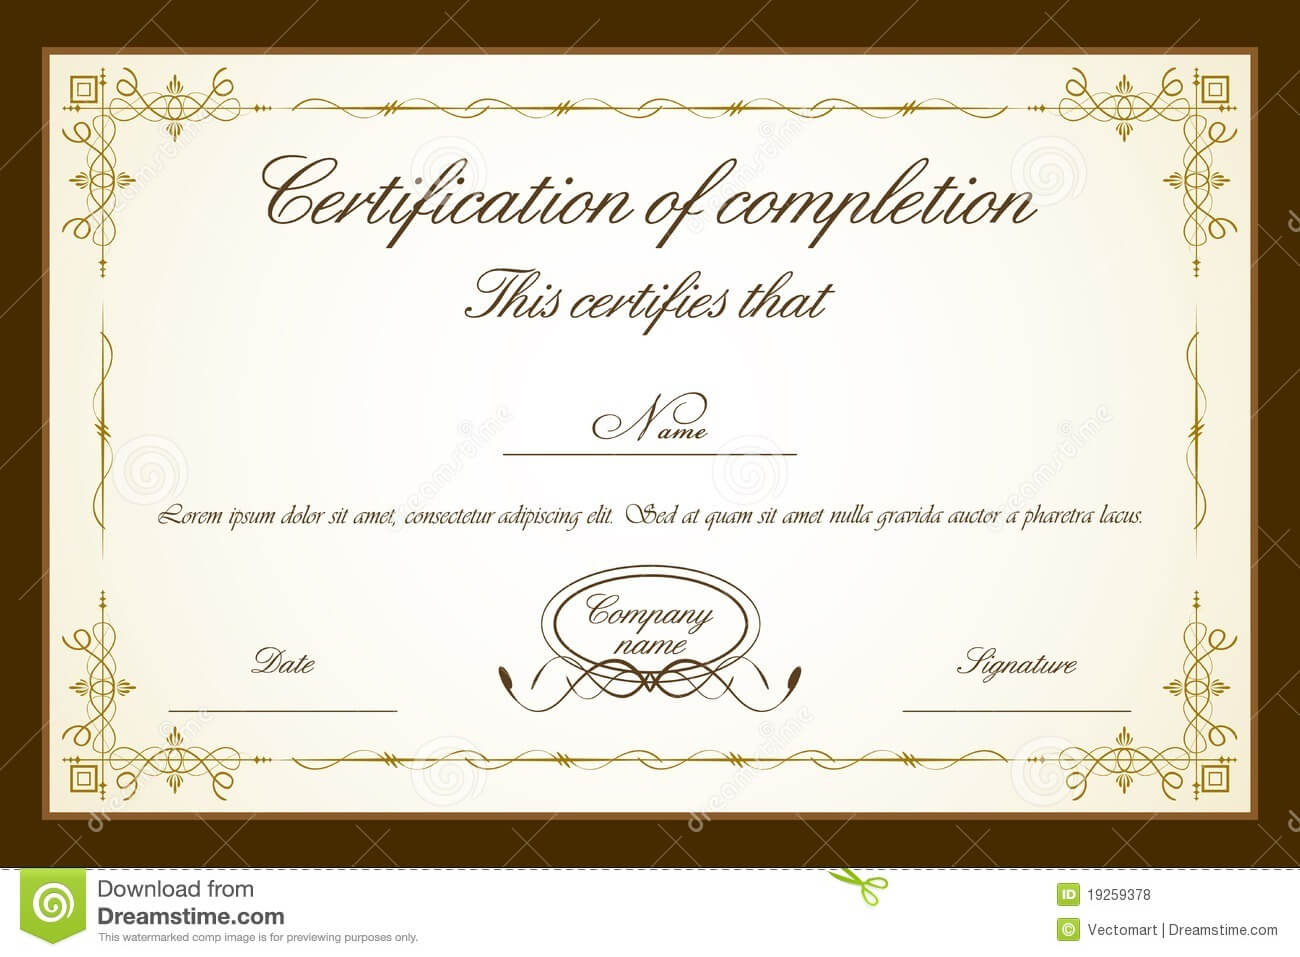 020 Certificate Template Free Blank Templates Wonderful Intended For Downloadable Certificate Templates For Microsoft Word